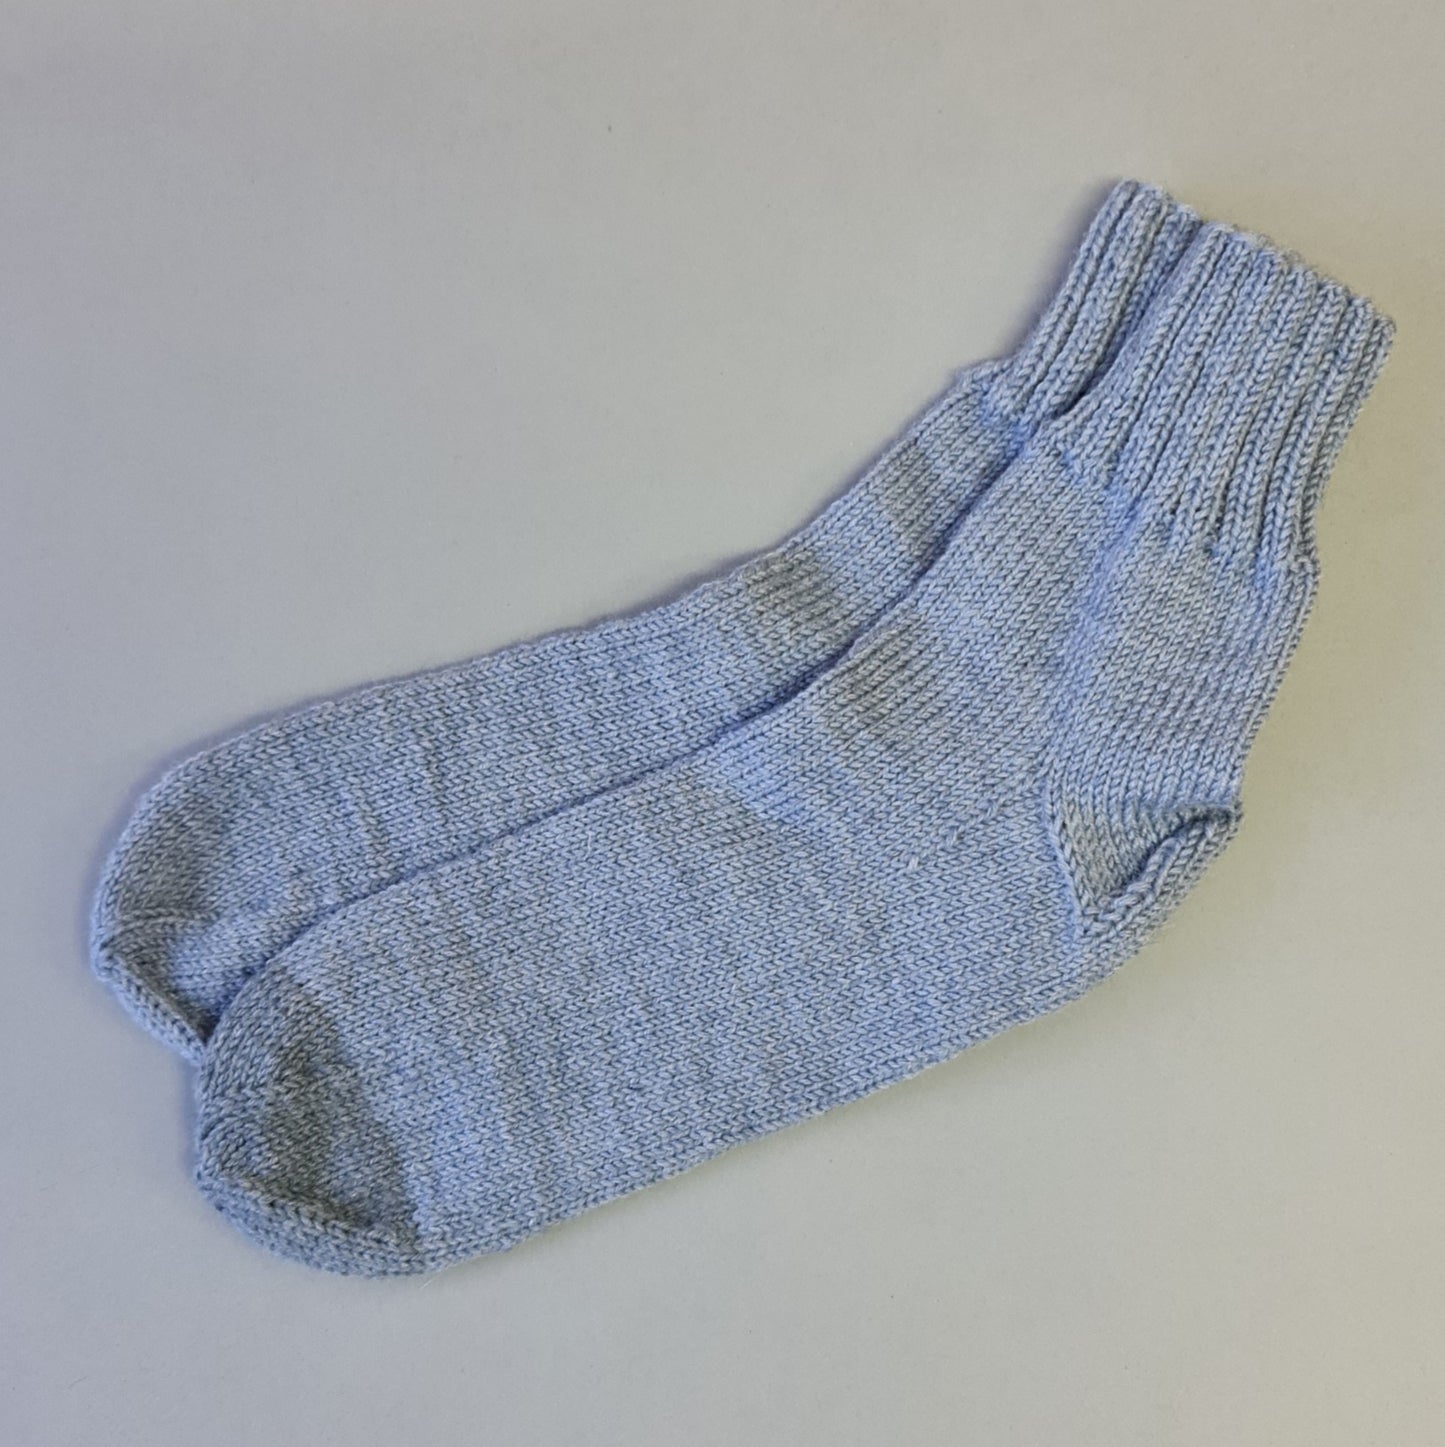 Sock yarn knitted warm socks size 35-37. gray-blue color (toe of a different tone for one sock) (MEN)